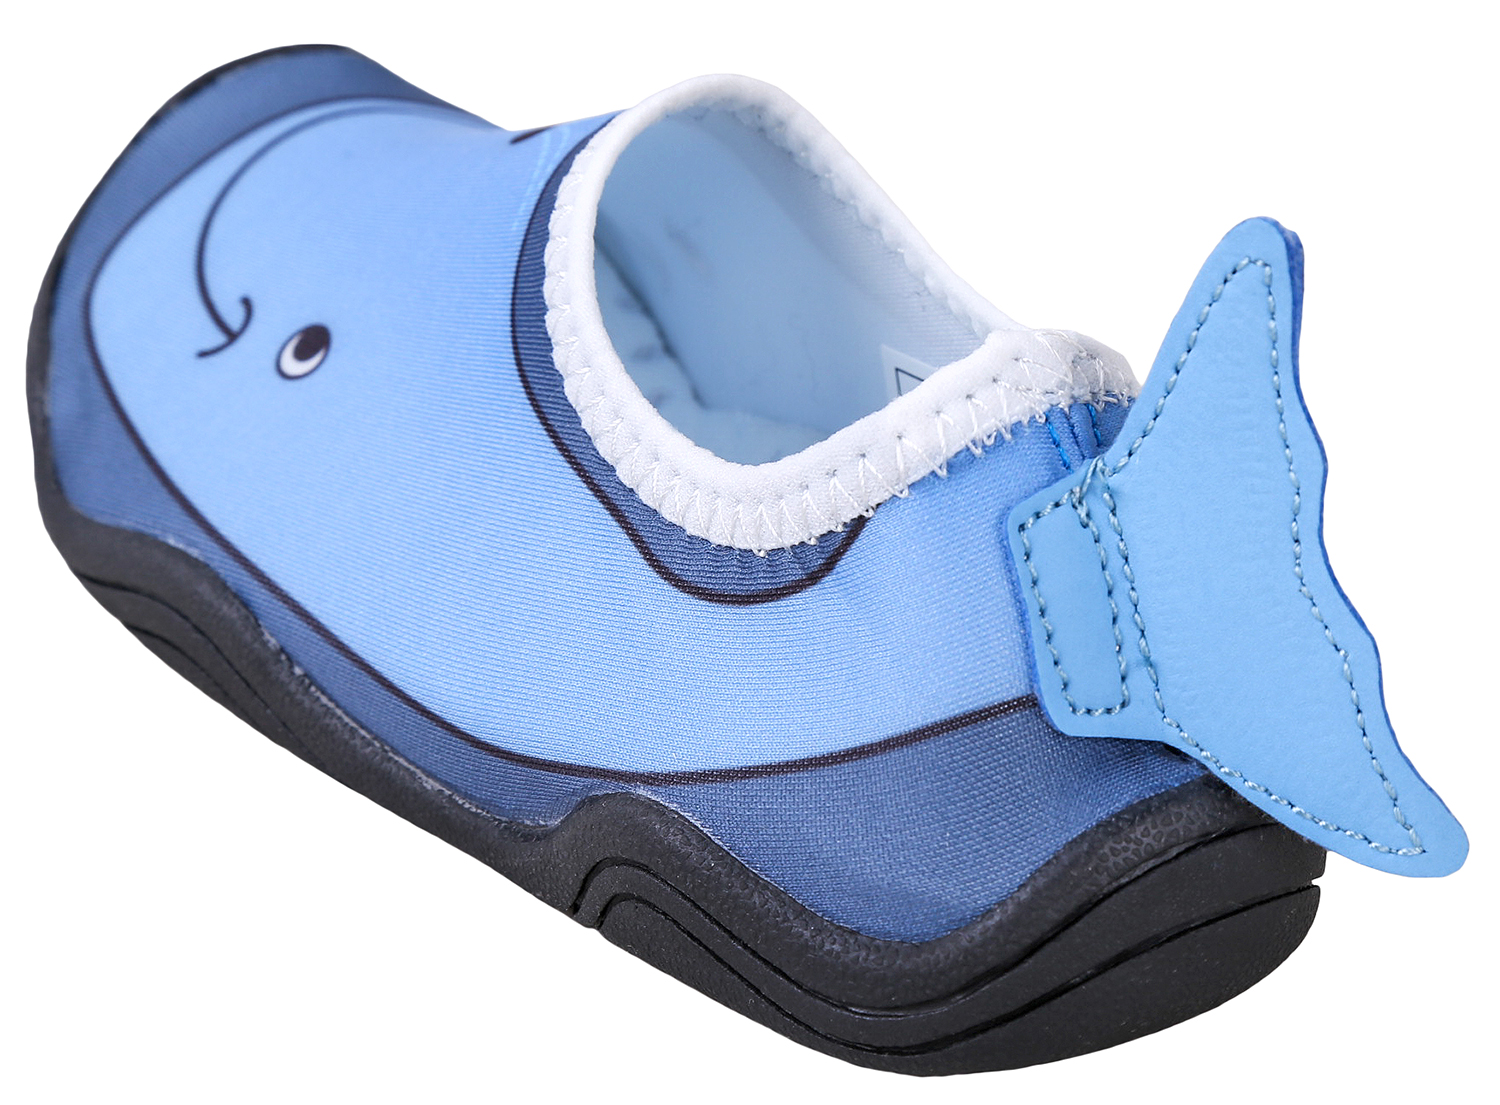 Lil' Fins Kids Water Shoes - Beach Shoes | Summer Fun | 3D Toddler Water Shoes Kids | Quick Dry | Swim Shoes Whale 10/11 M US - image 4 of 5